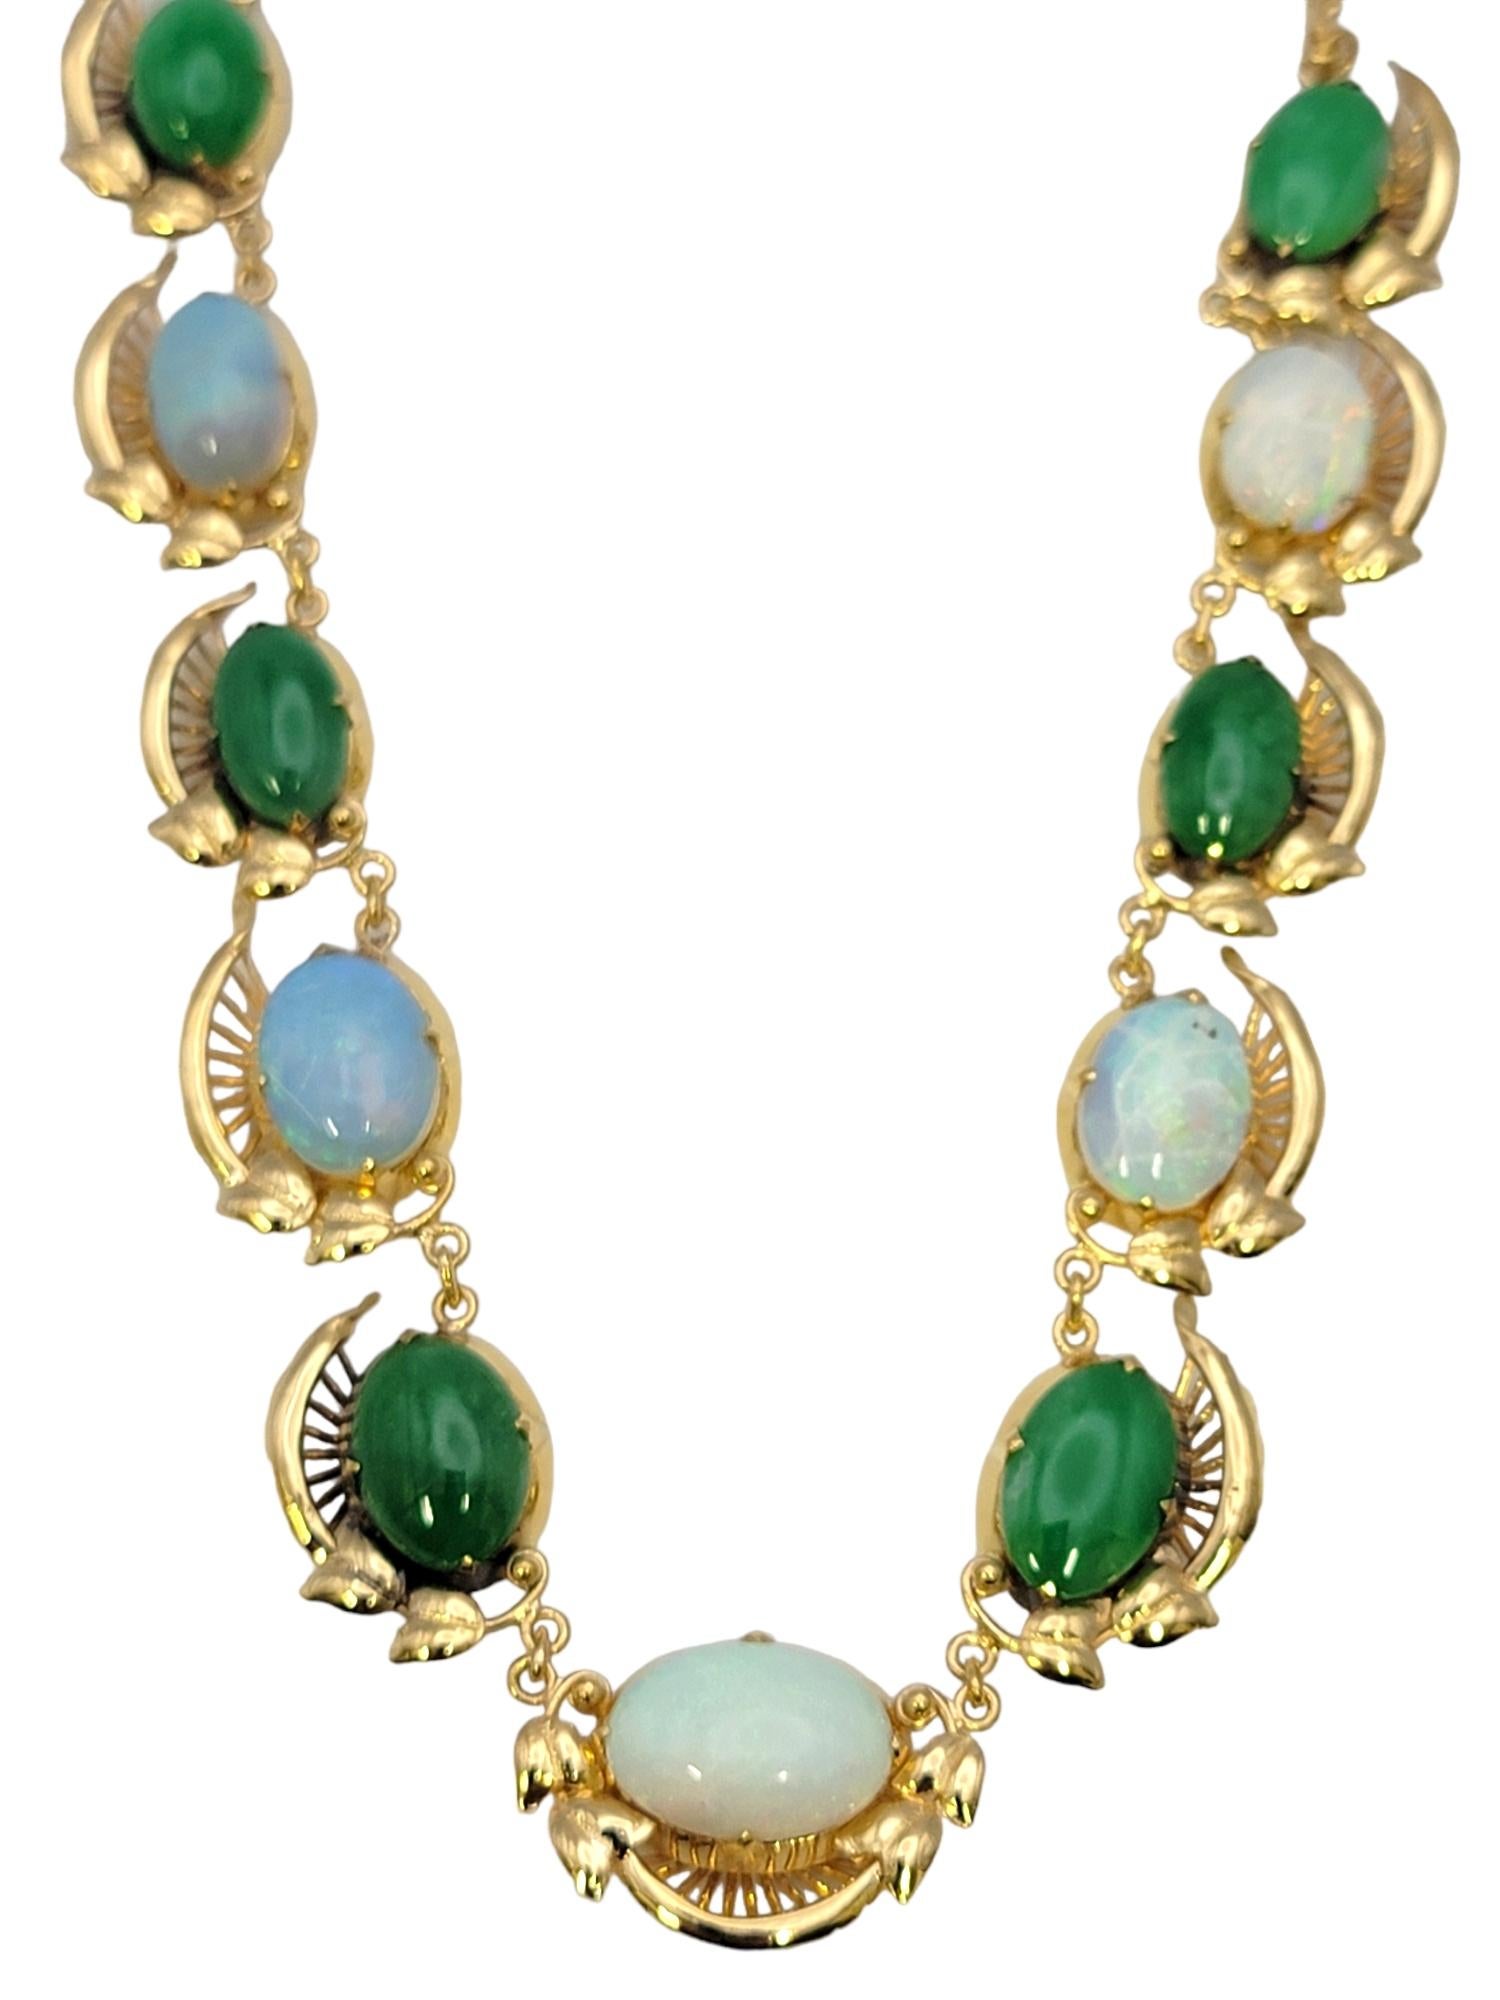 Colorful and elegant necklace featuring stunning opal and jadeite gemstones. Each beautifully striated natural stone has its own unique color and design, creating a truly one of a kind piece.  
 
This beautiful piece of fine jewelry features a